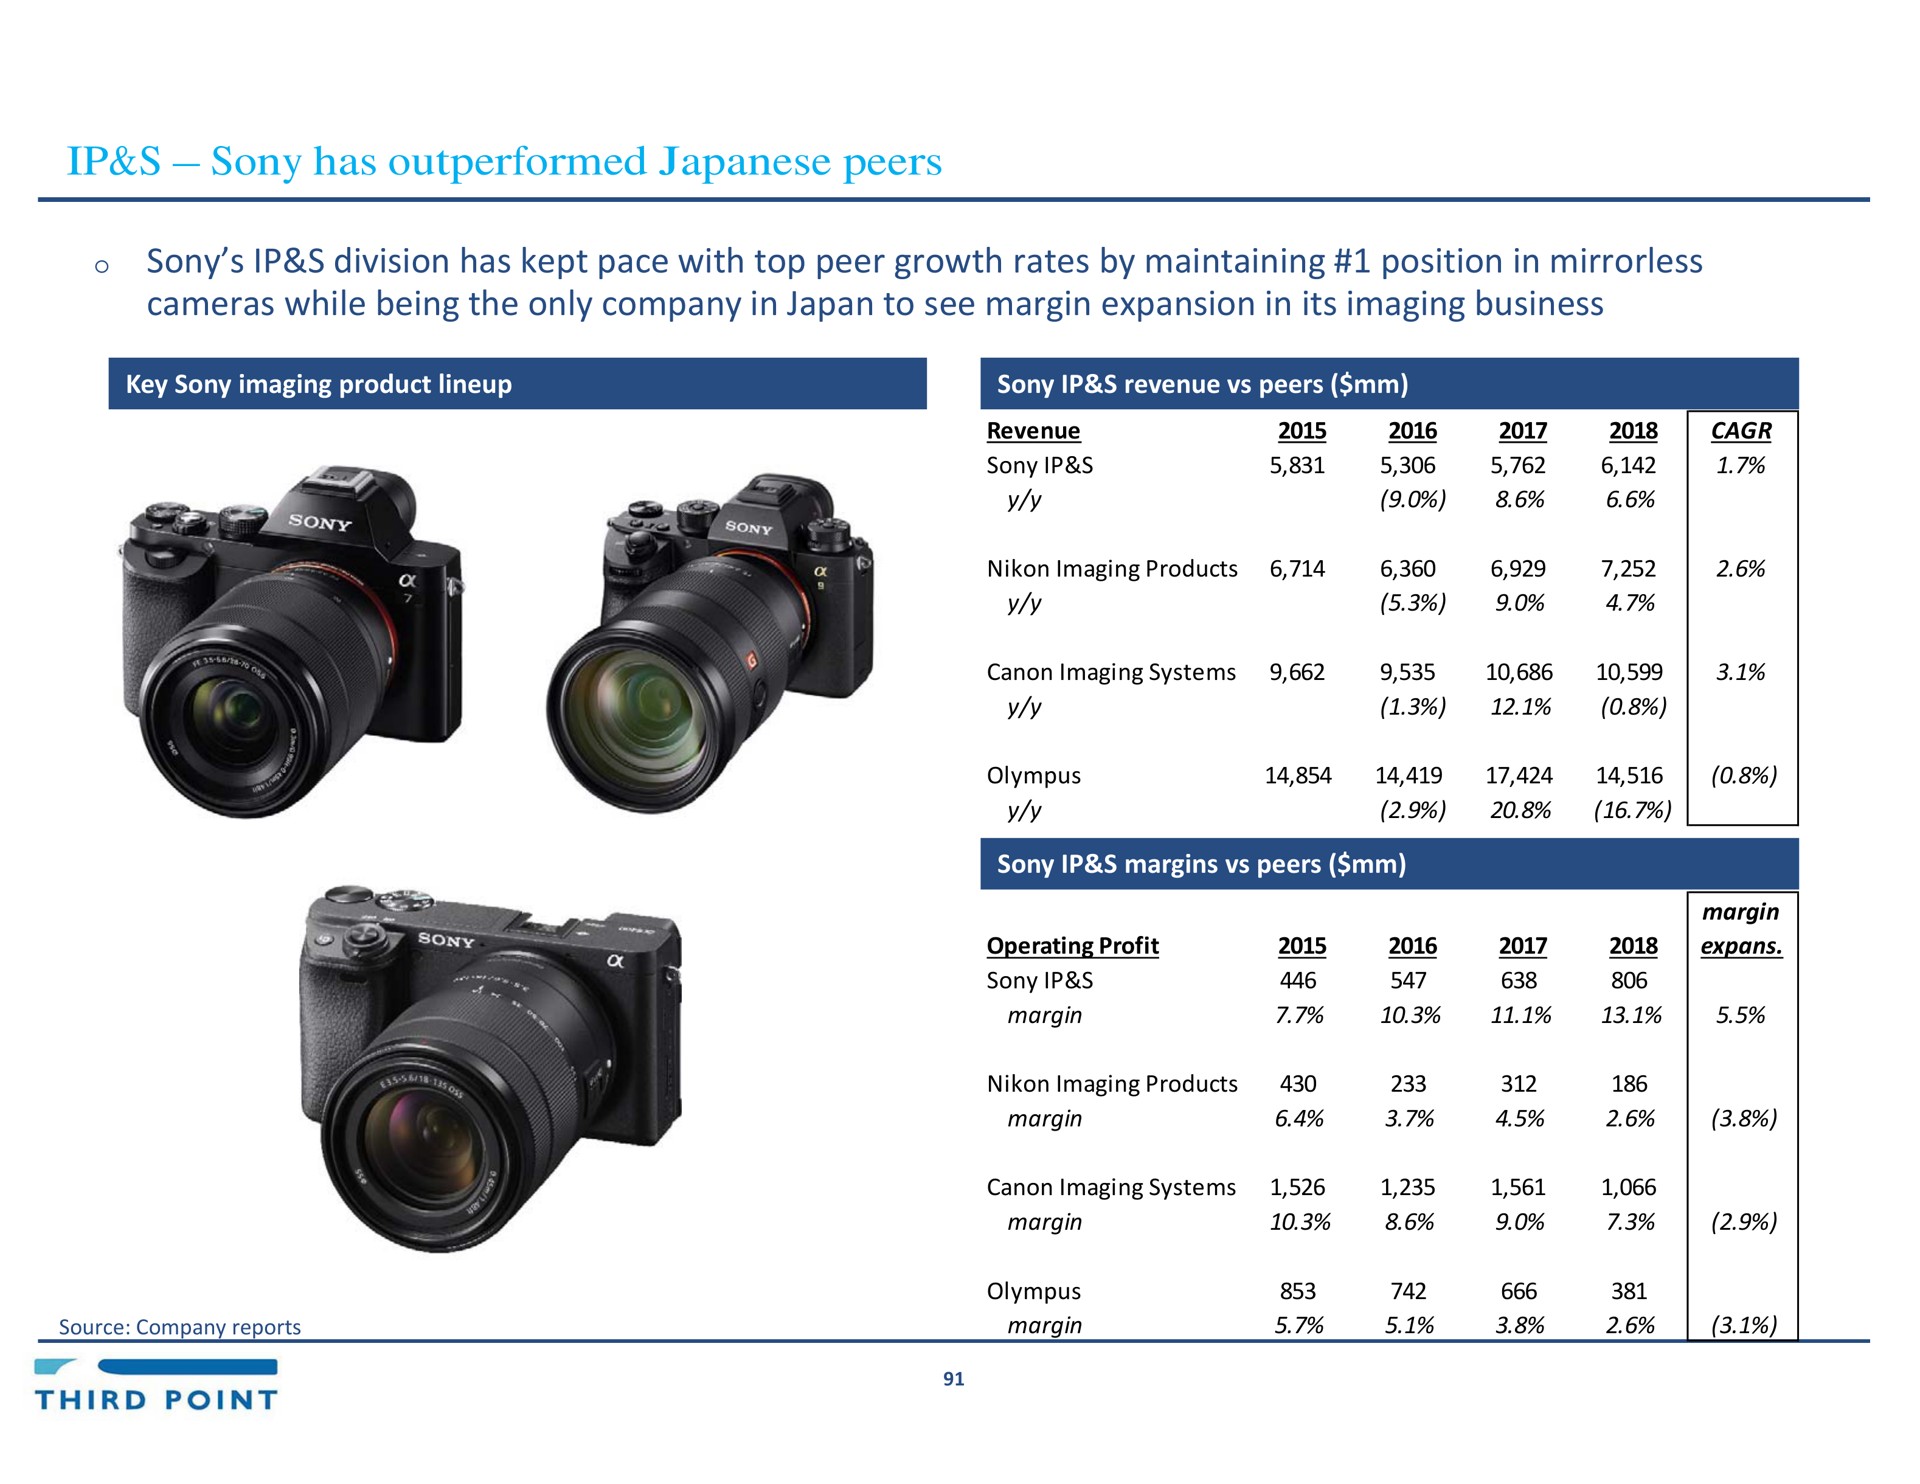 has outperformed peers division has kept pace with top peer growth rates by maintaining position in cameras while being the only company in japan to see margin expansion in its imaging business | Third Point Management